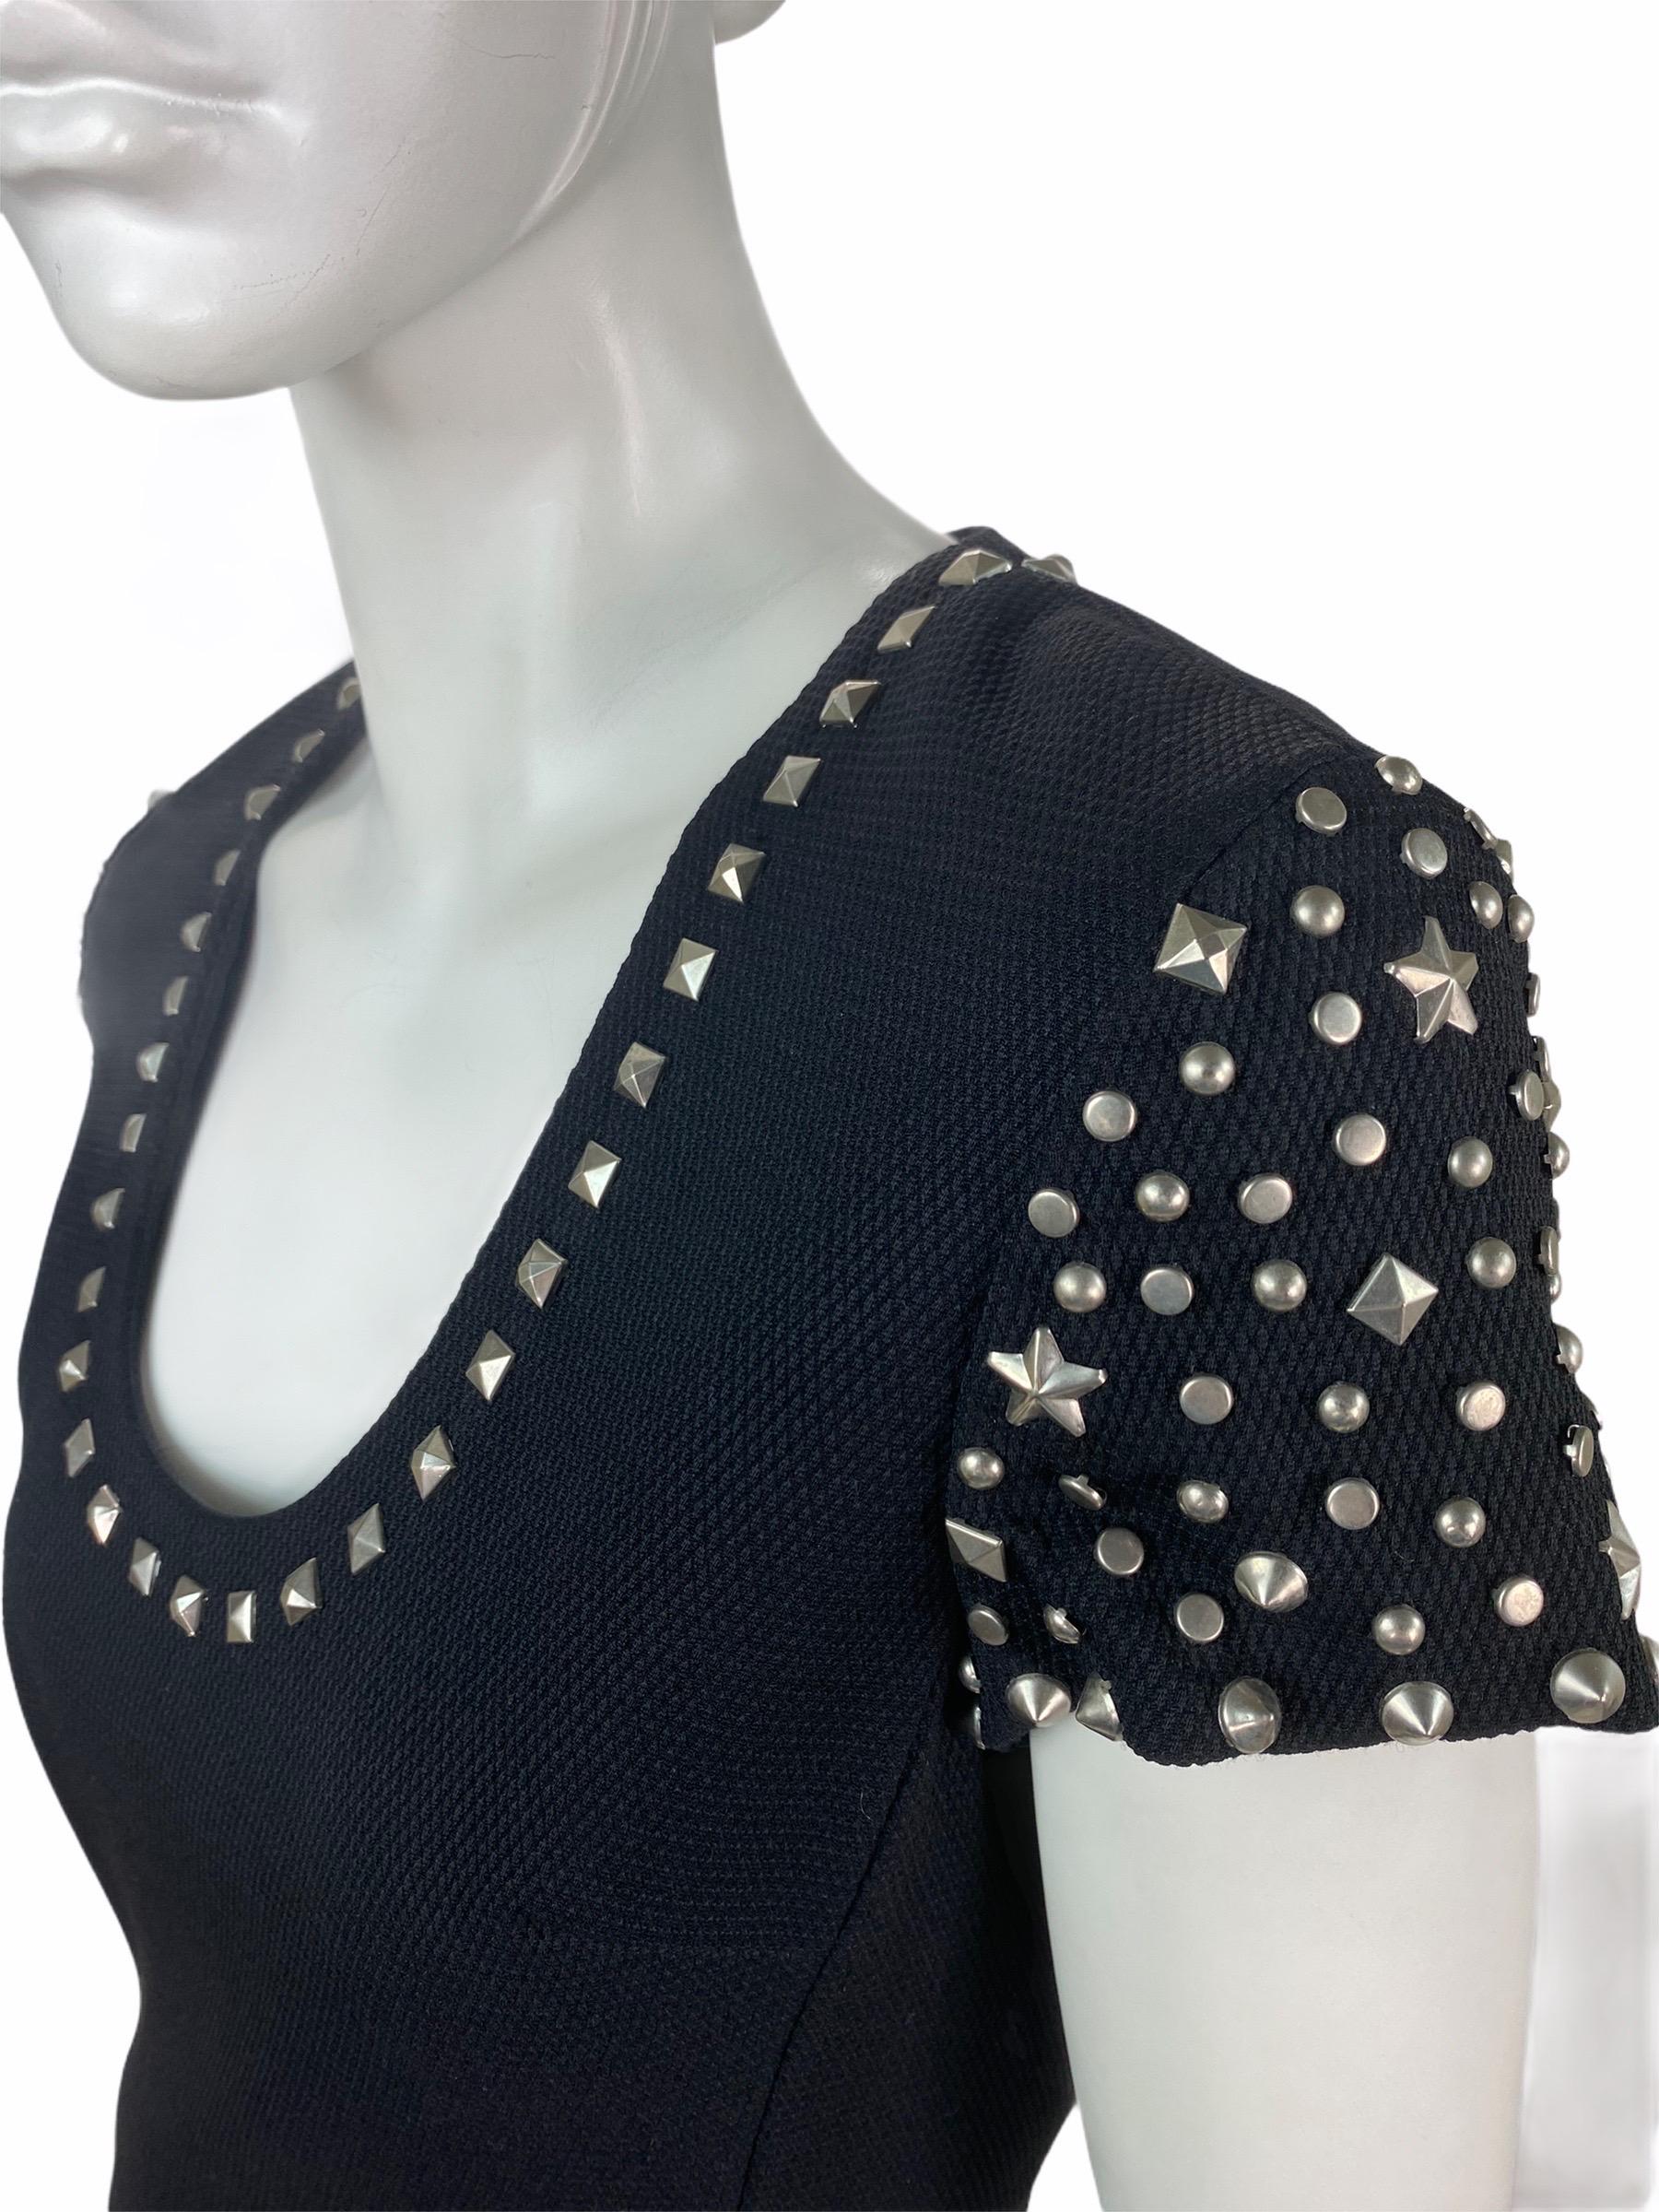 Gianni Versace Couture Embellished Black Cocktail Dress
Vintage 1998 Collection - Black Label.
Italian size 40 - US 6 
Embellished Black Dress, Silver Studs. Fully Lined, Back Zip Closure.
79% Wool, 13% Rayon, 5% Nylon, 3% Silk. 
Measurements: